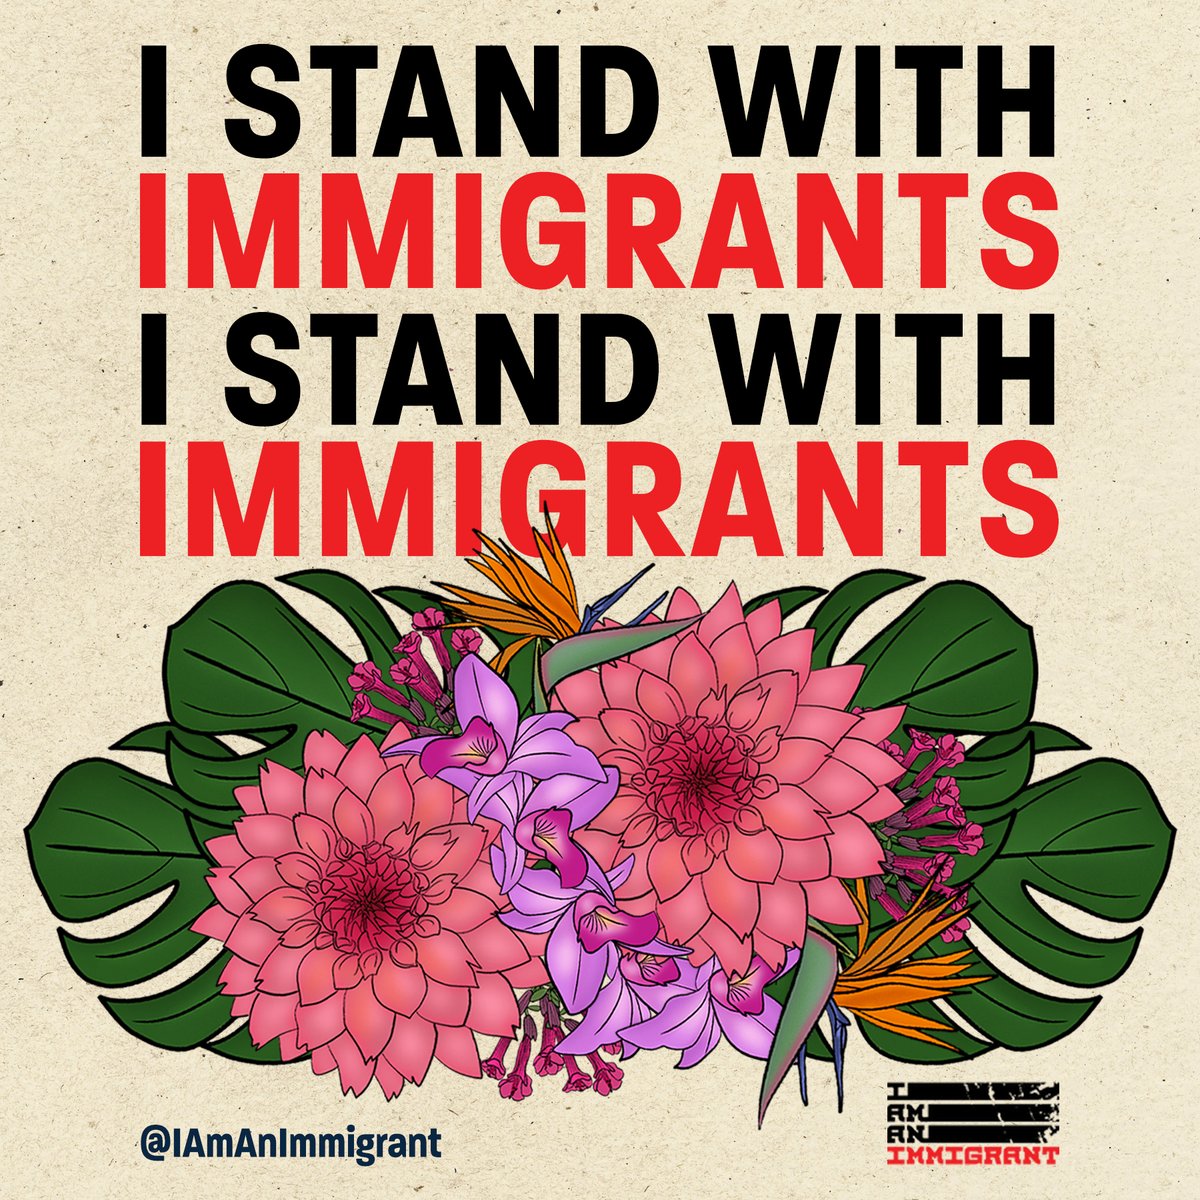 It’s the 8th annual #IStandWithImmigrants Day of Action! @IAmAnImmigrant empowers immigrants and allies to share their stories and encourages everyone to explore their heritage. Follow @IAmAnImmigrant to celebrate and hear immigrant stories. ❤️